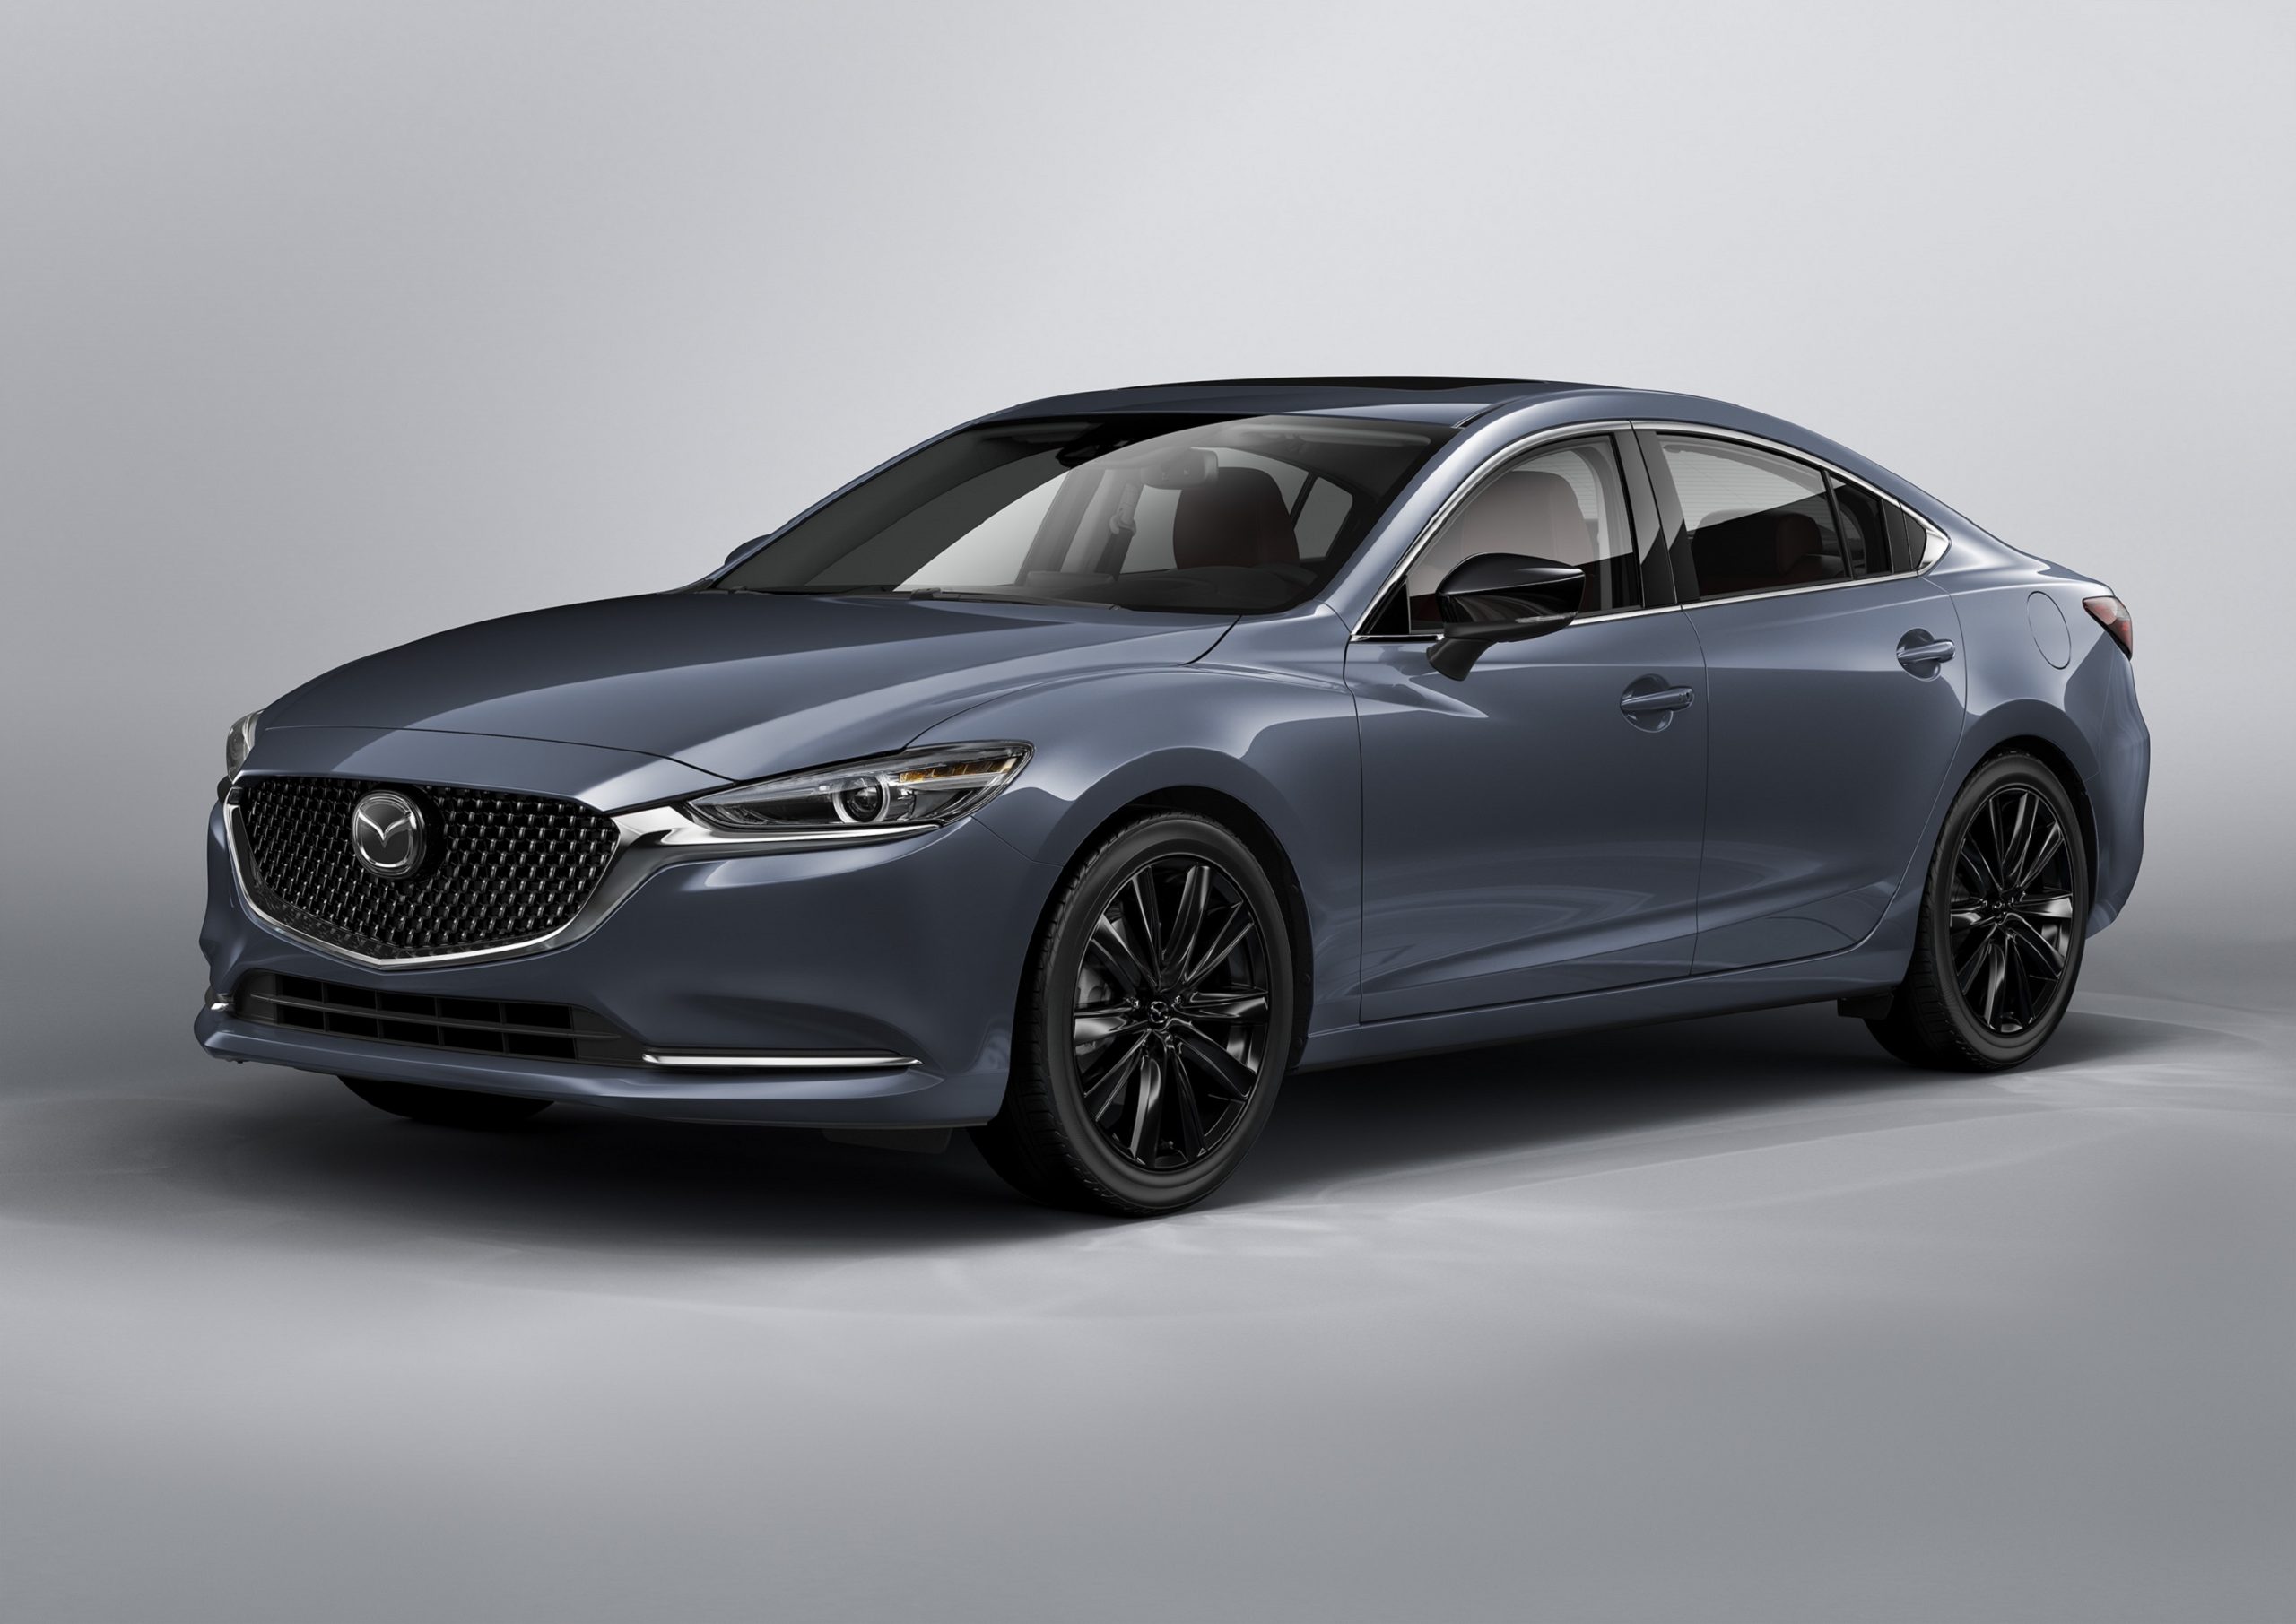 A grey 2021 Mazda 6 sedan shot from the front 3/4 angle in a studio